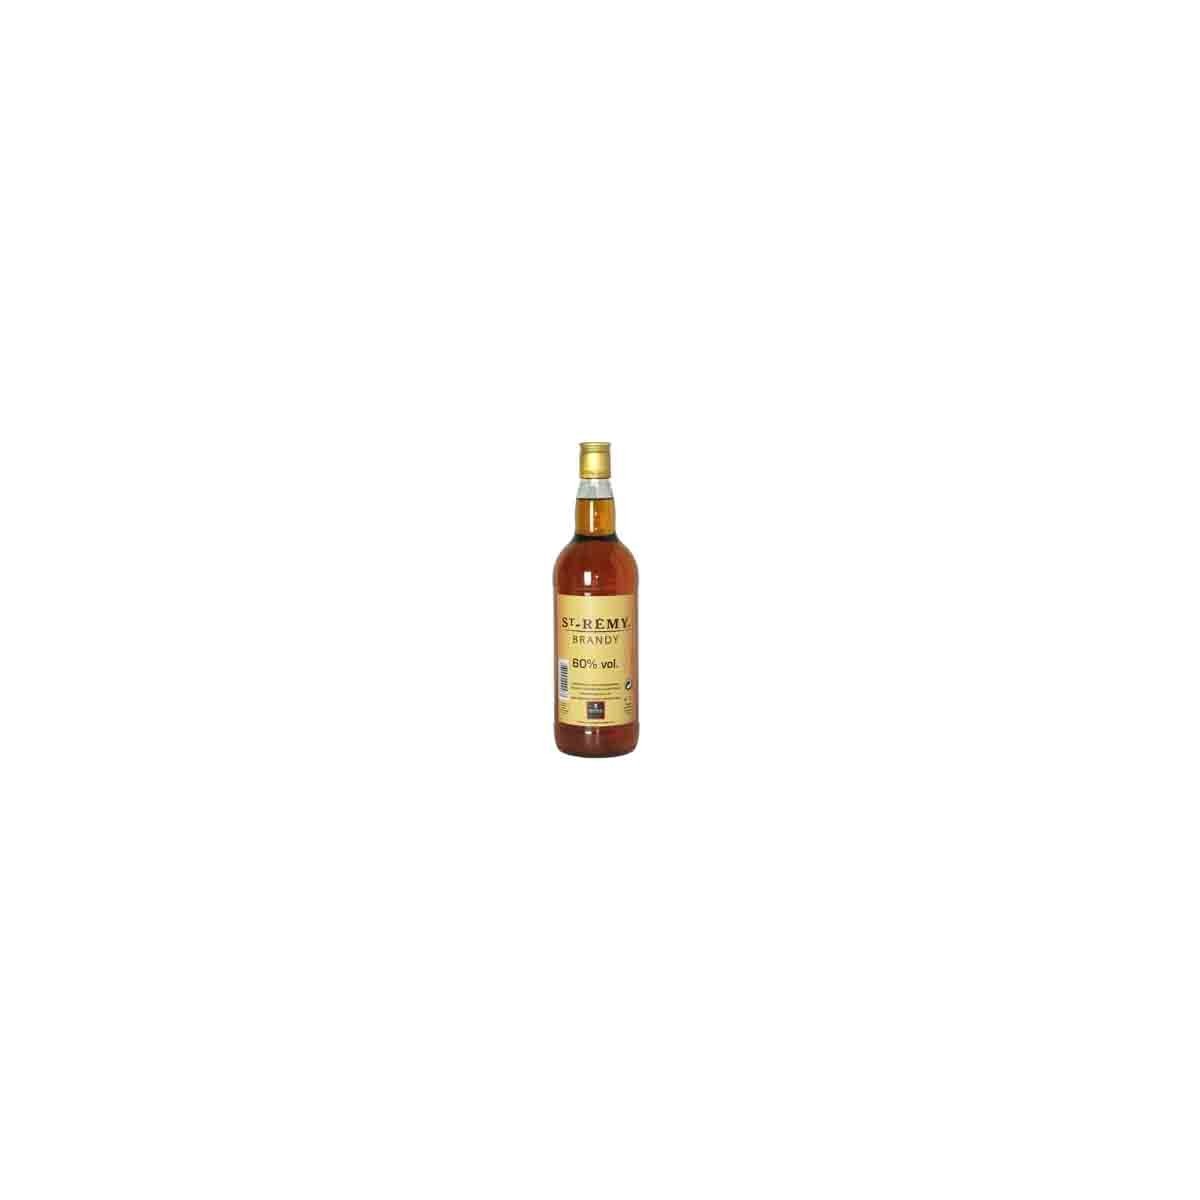 COGNAC BRANDY SAINT REMY CONCENTRATED 60% WITH EXCISE DUTY 1L  LITER